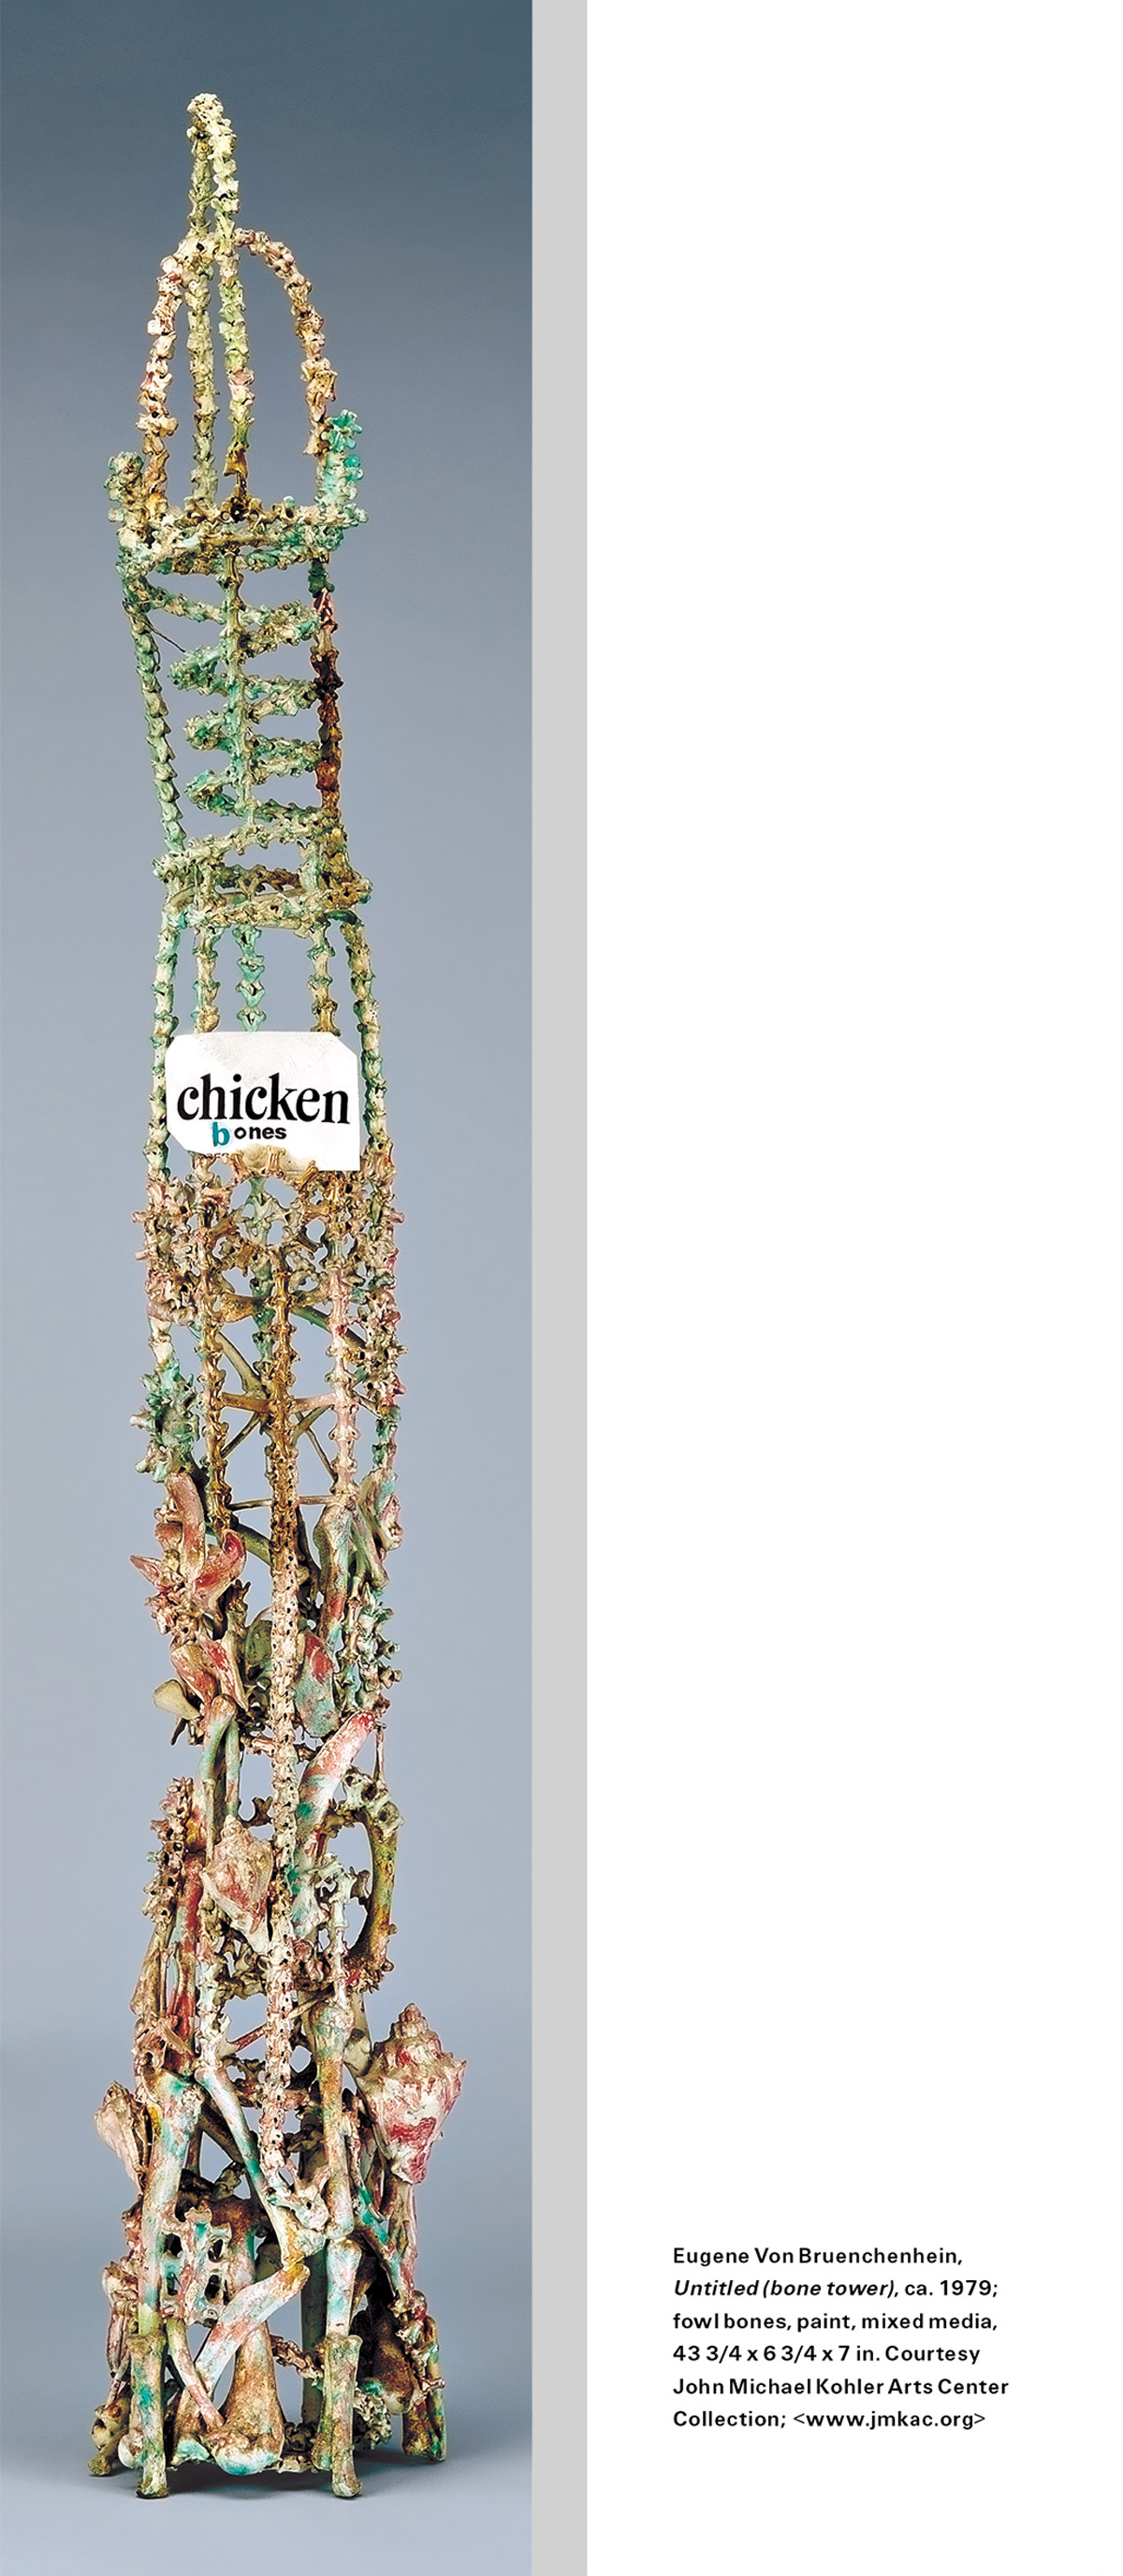 This issue's bookmark, featuring a photograph of a tower made out of fowl bones by artist Eugene von Bruenchenhein on its front, and, on its back, the caption: Eugene von Bruenchenhein, 